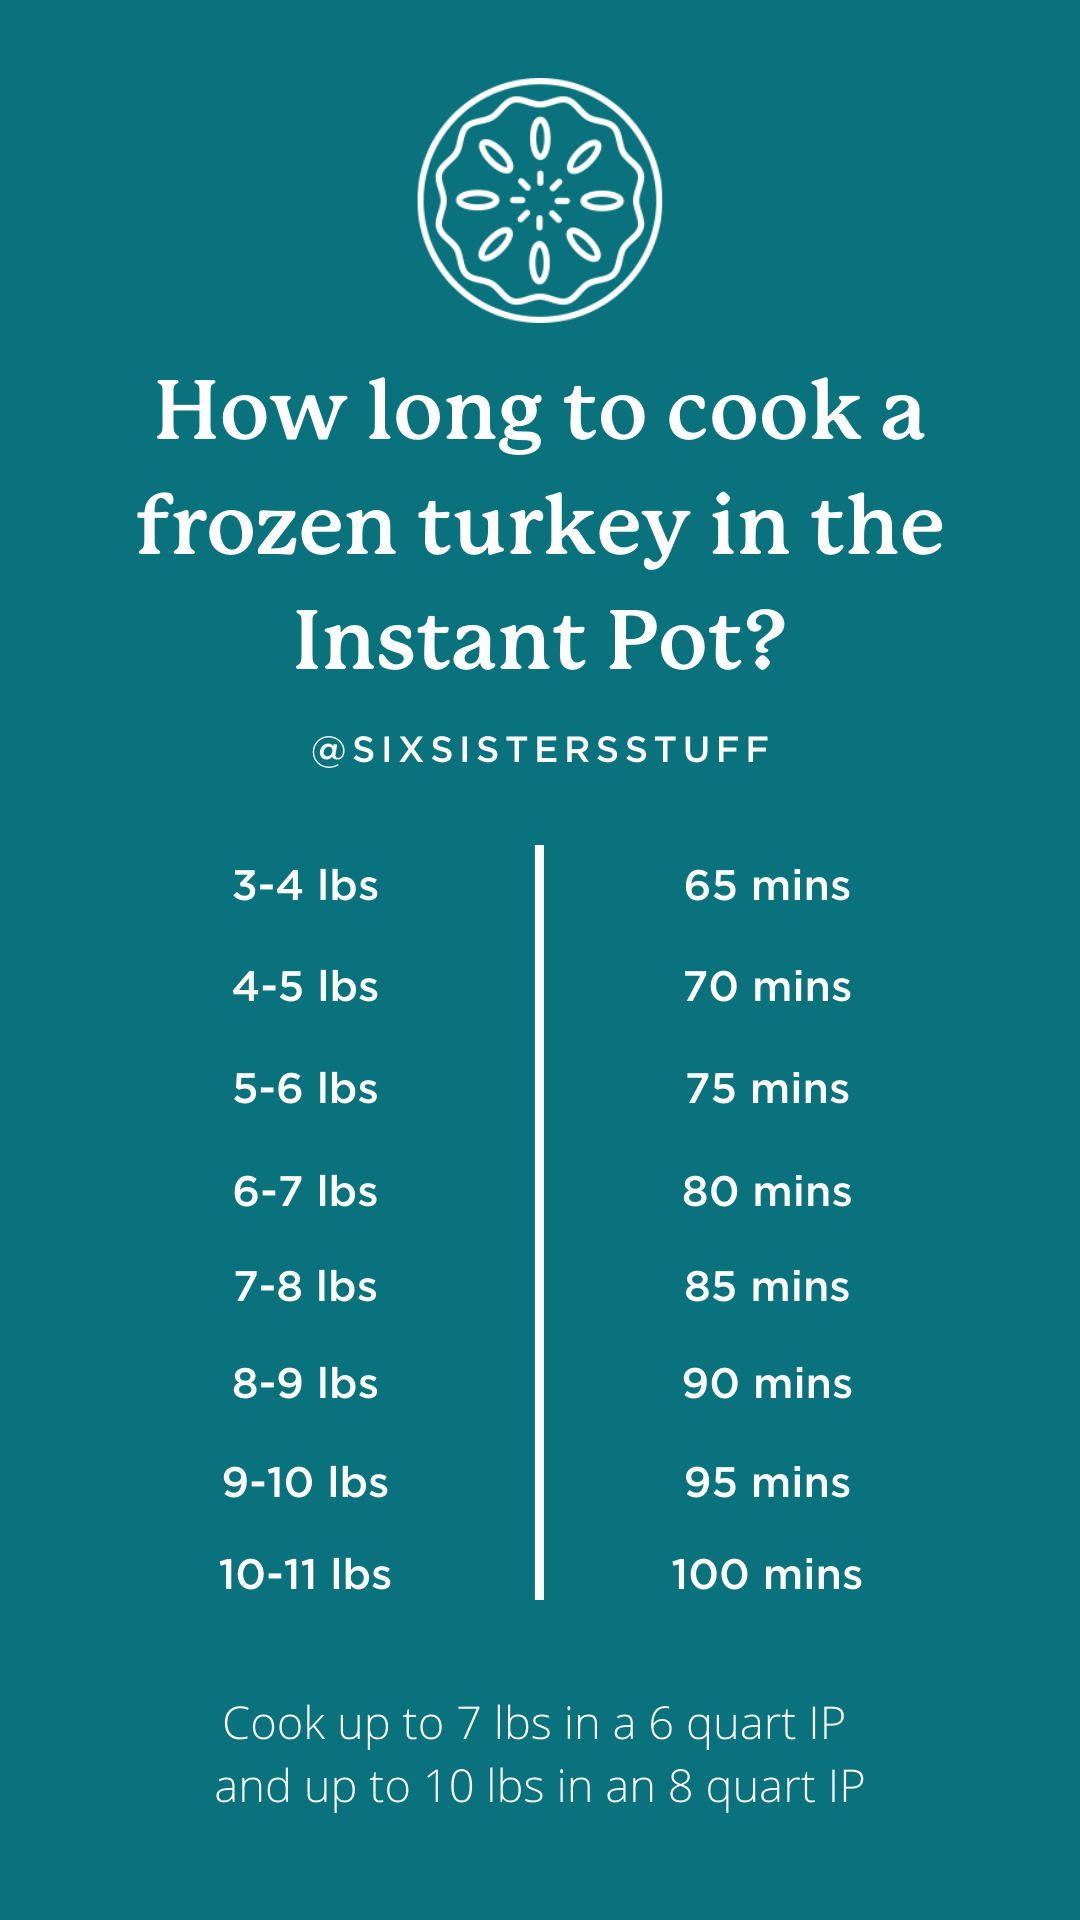 chart that shows how long to cook a frozen turkey in the Instant Pot